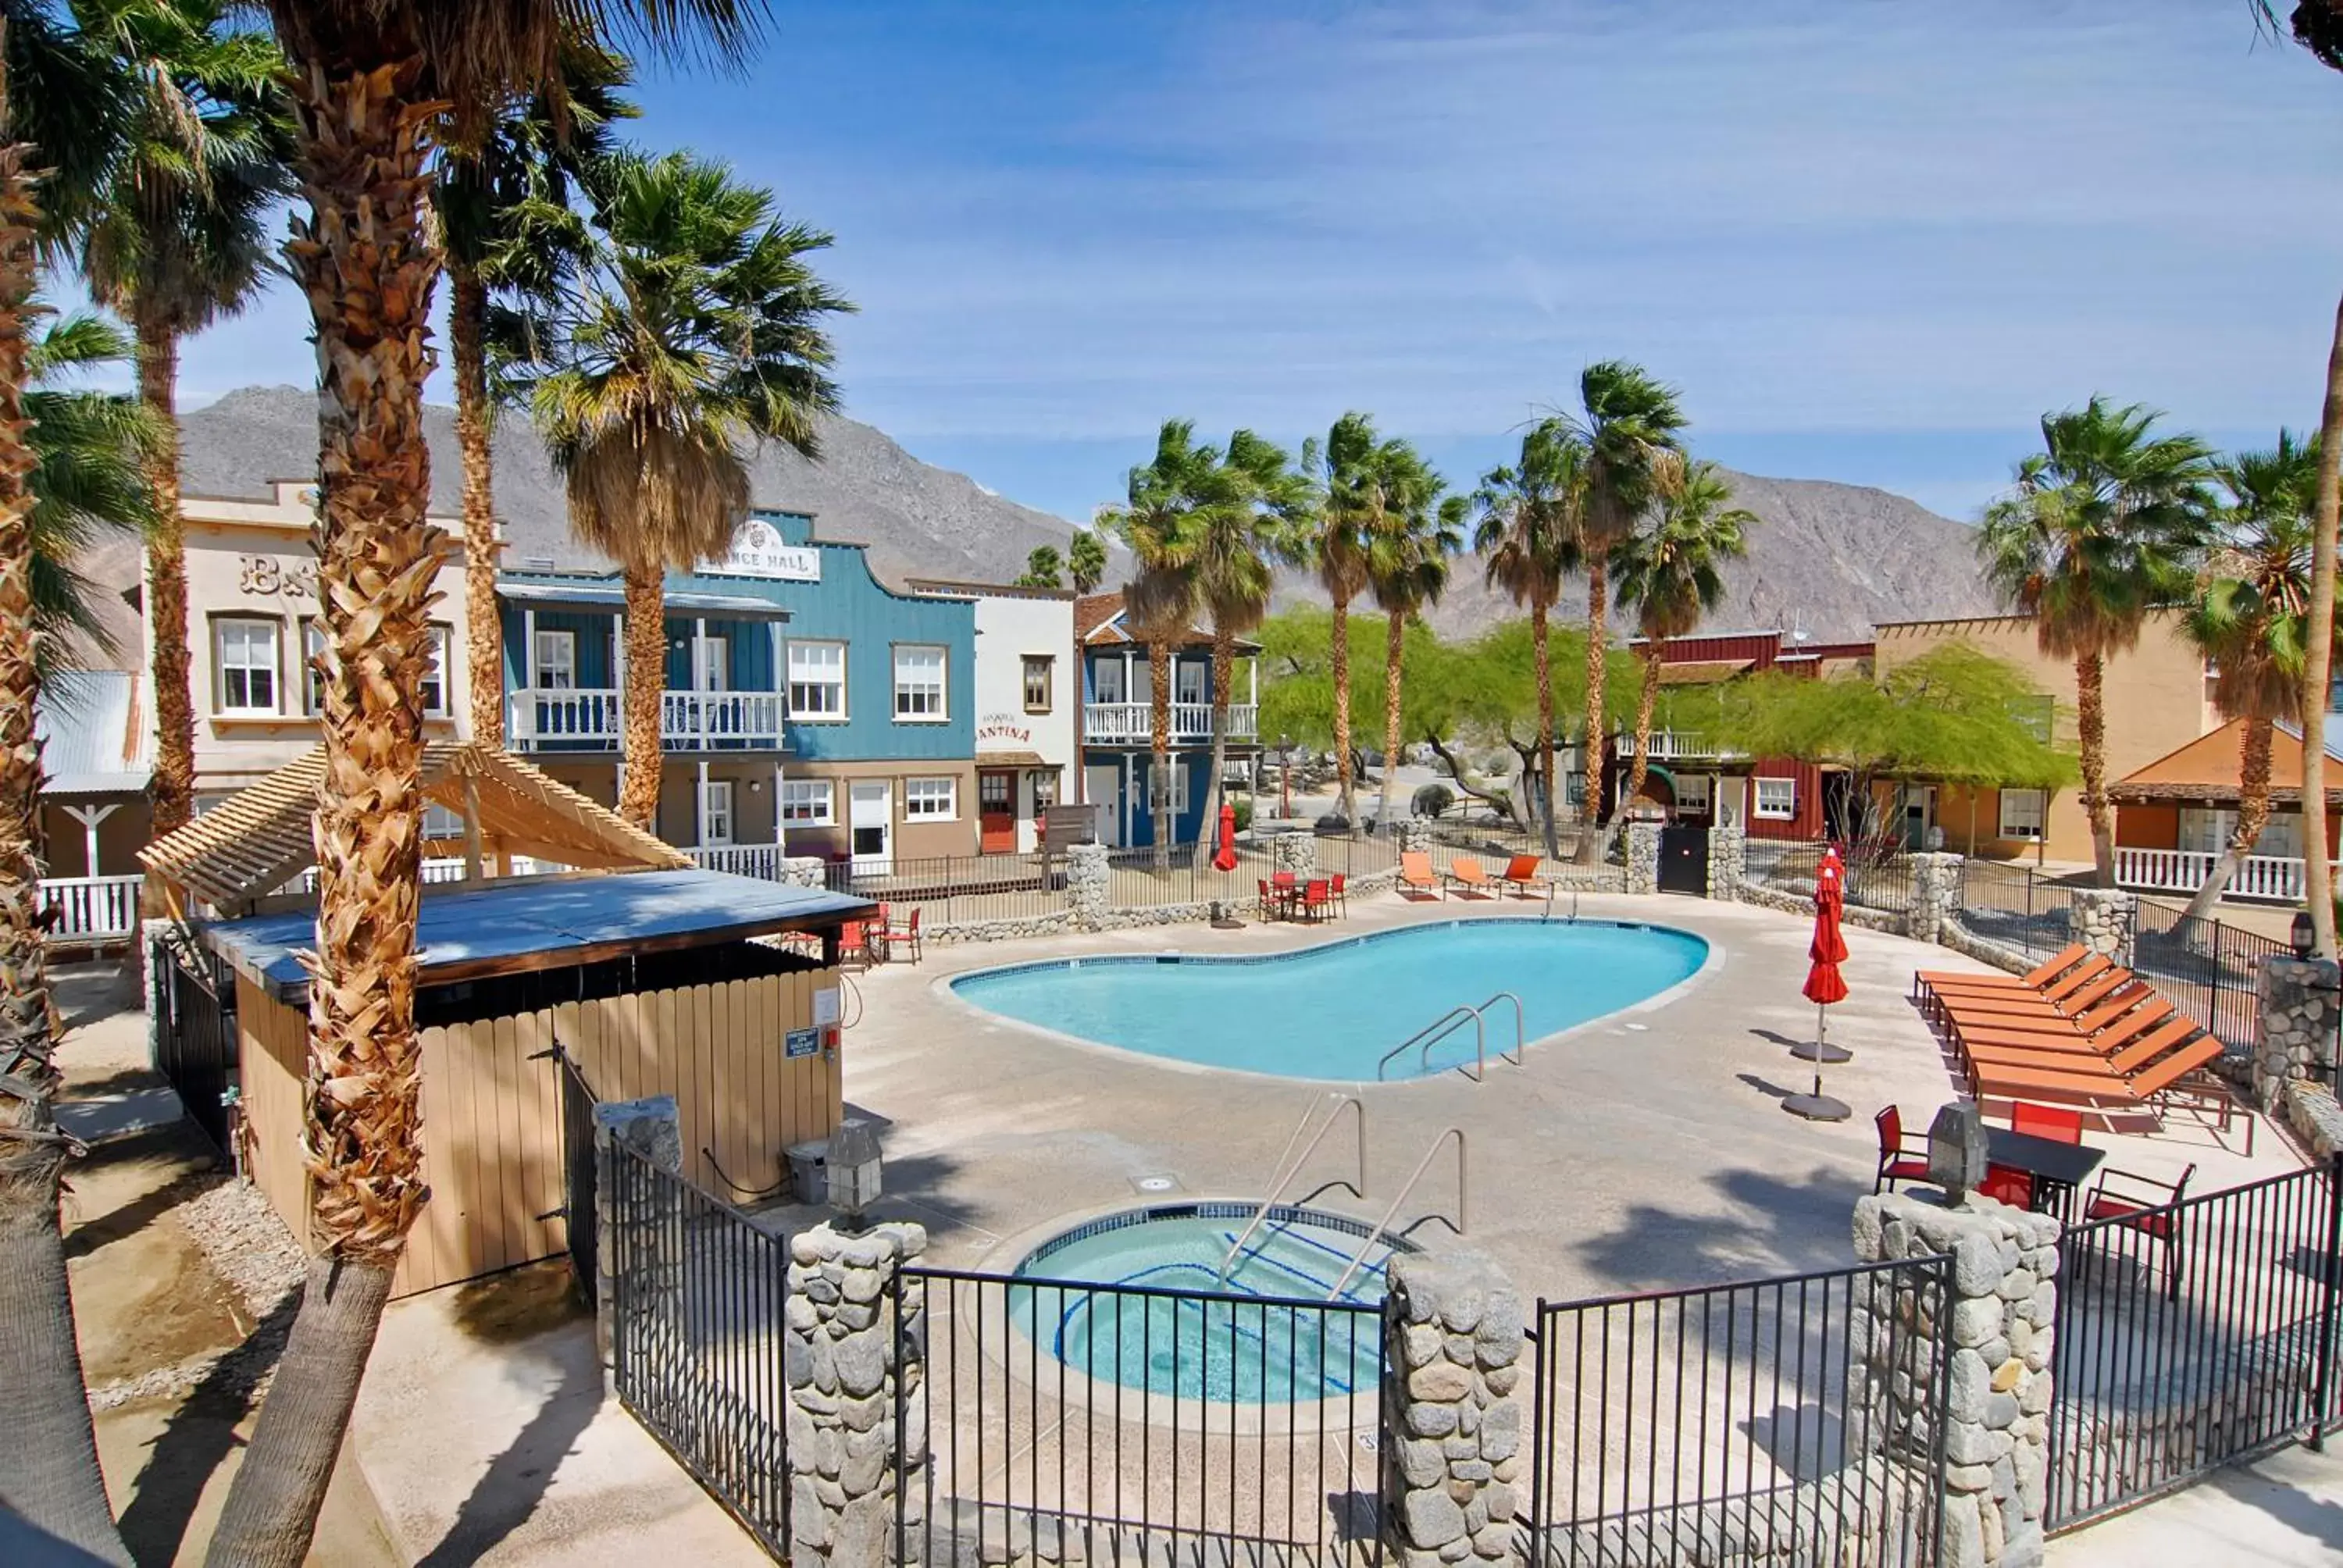 Property building, Pool View in Palm Canyon Hotel and RV Resort